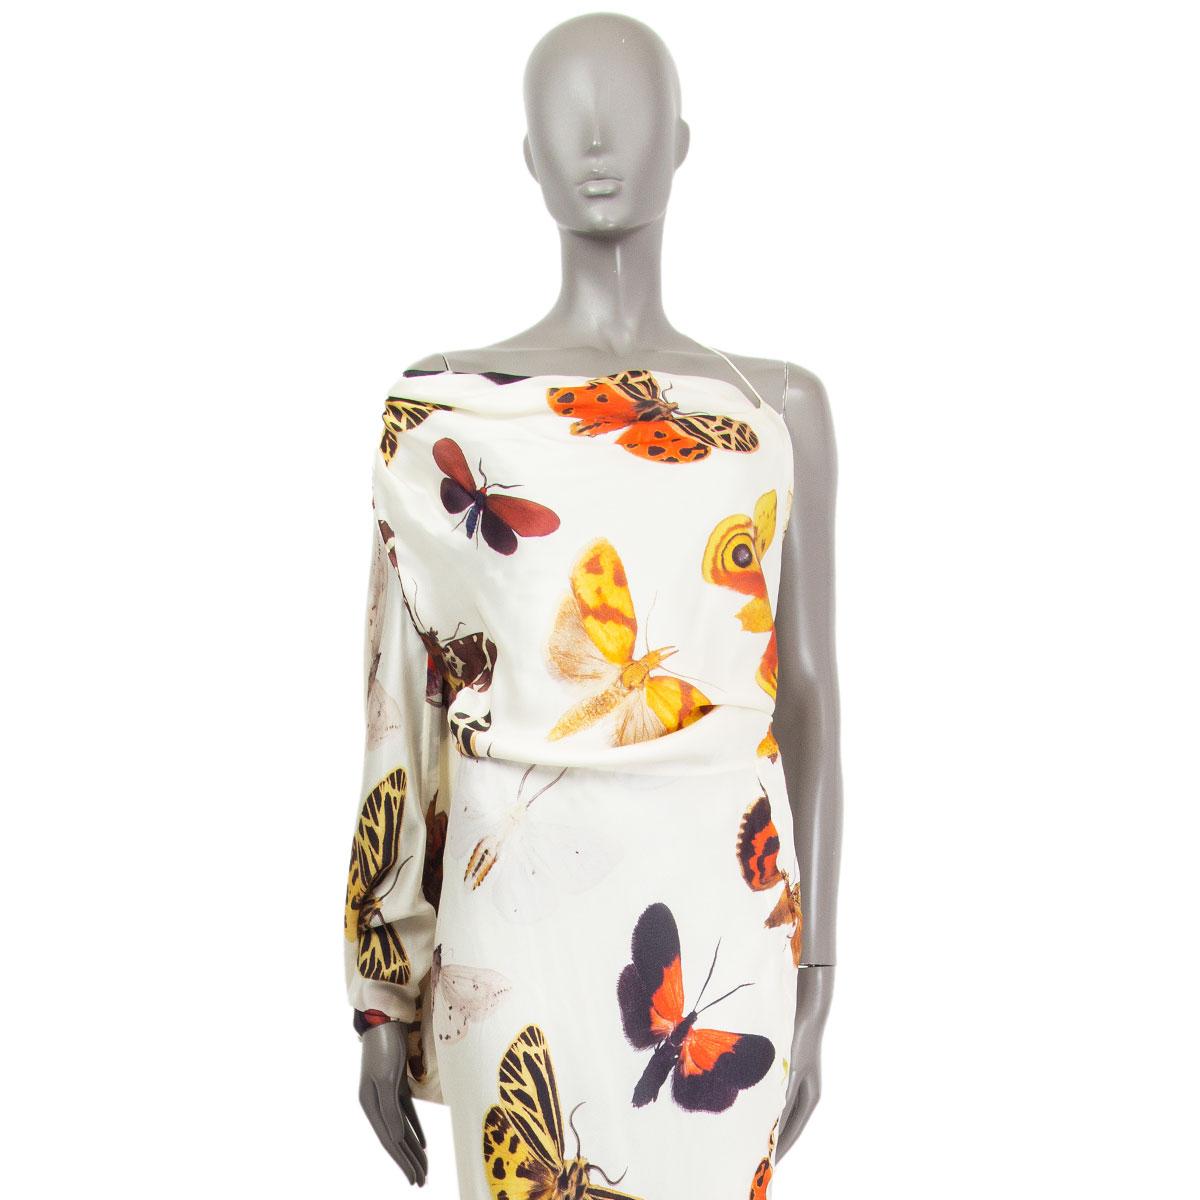 authentic Alexander McQueen satin evening gown in cream silk (100%) with one-shoulder draped bias-cut, butterfly print in multi-colors. Lined in white silk (100%). Closes with a concealed zipper on the left side. Has been worn and is in excellent